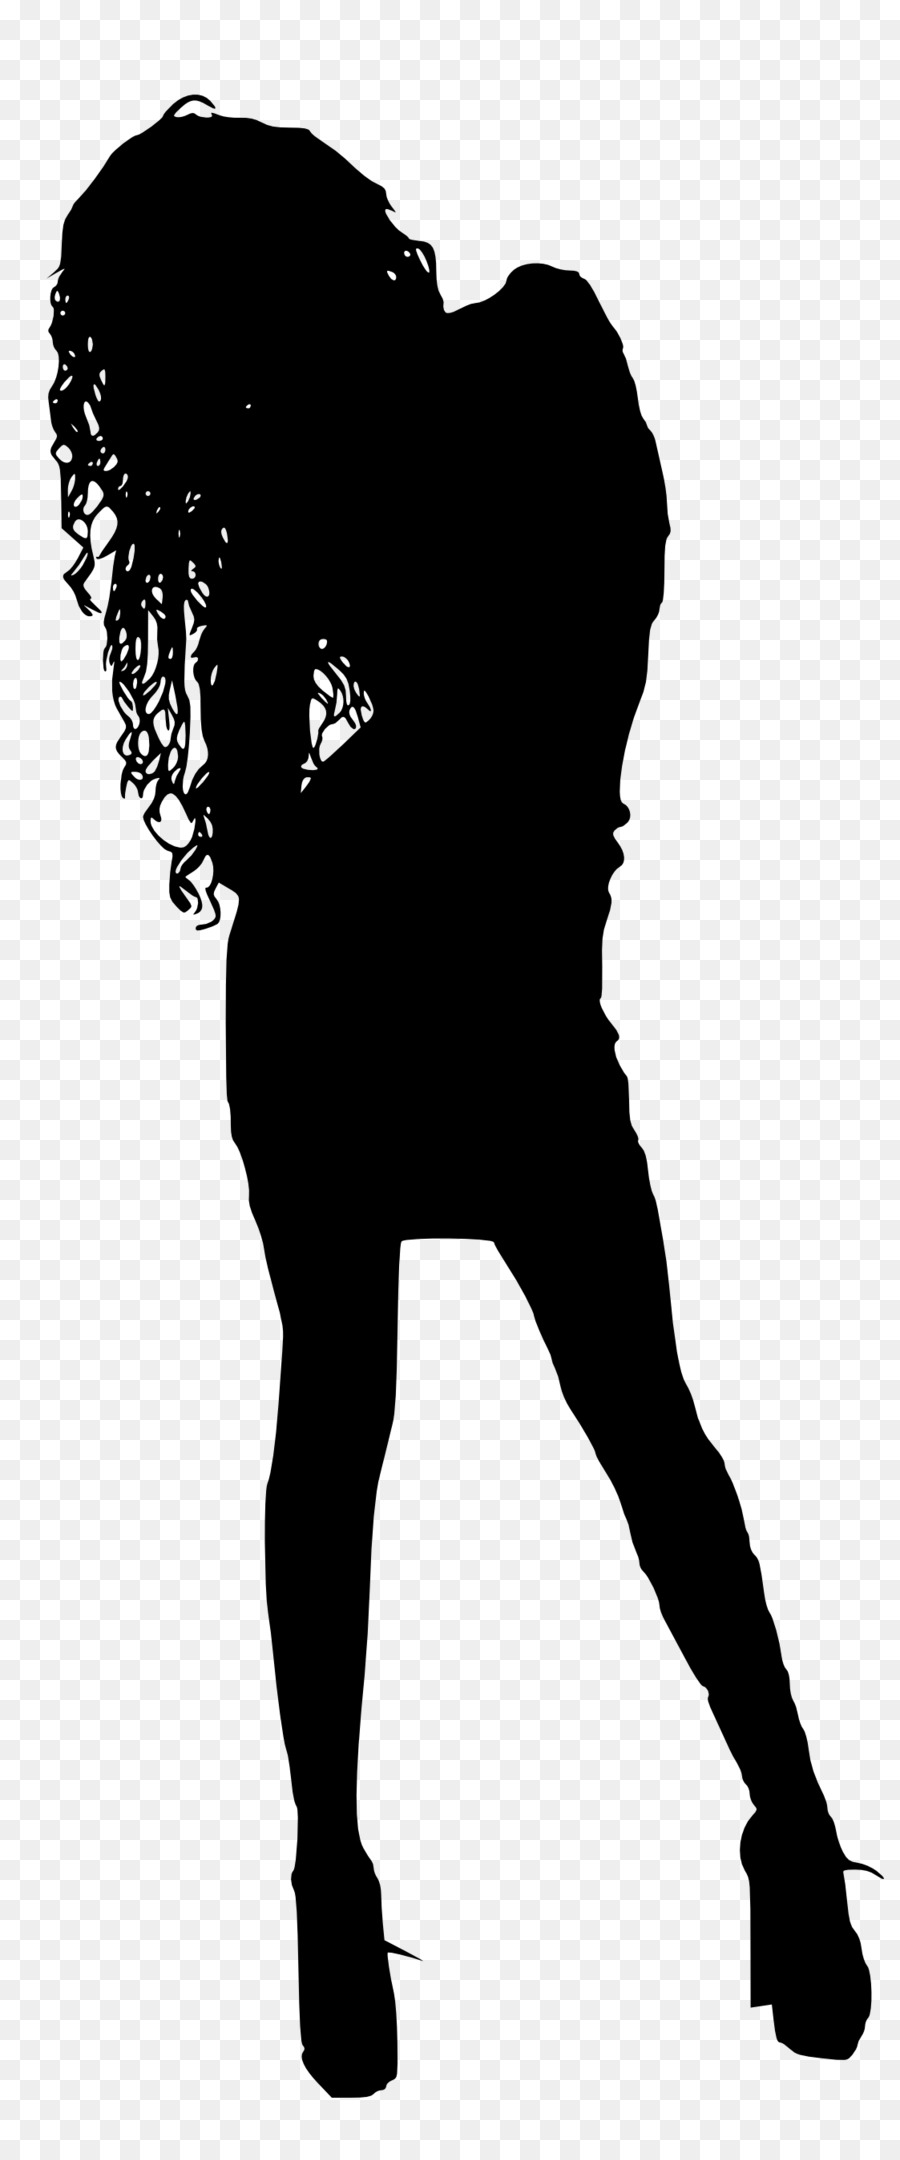 Silhouette Woman Female - silhouette png download - 1123*2687 - Free Transparent  png Download.